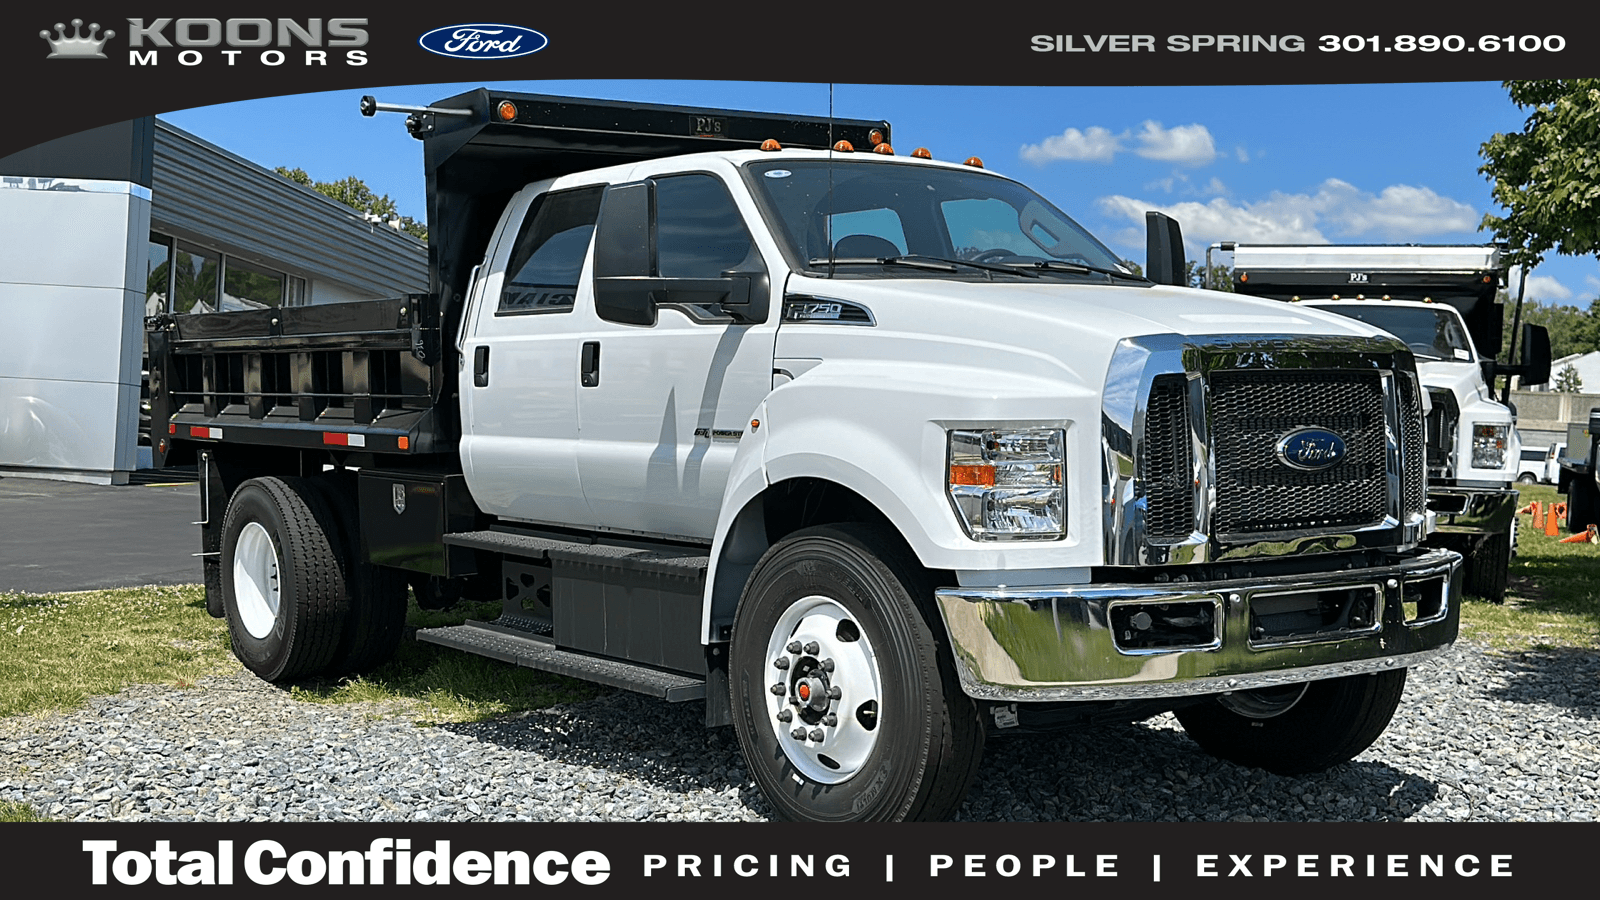 2024 Ford F-650, F-750 Photo in Silver Spring, MD 20904